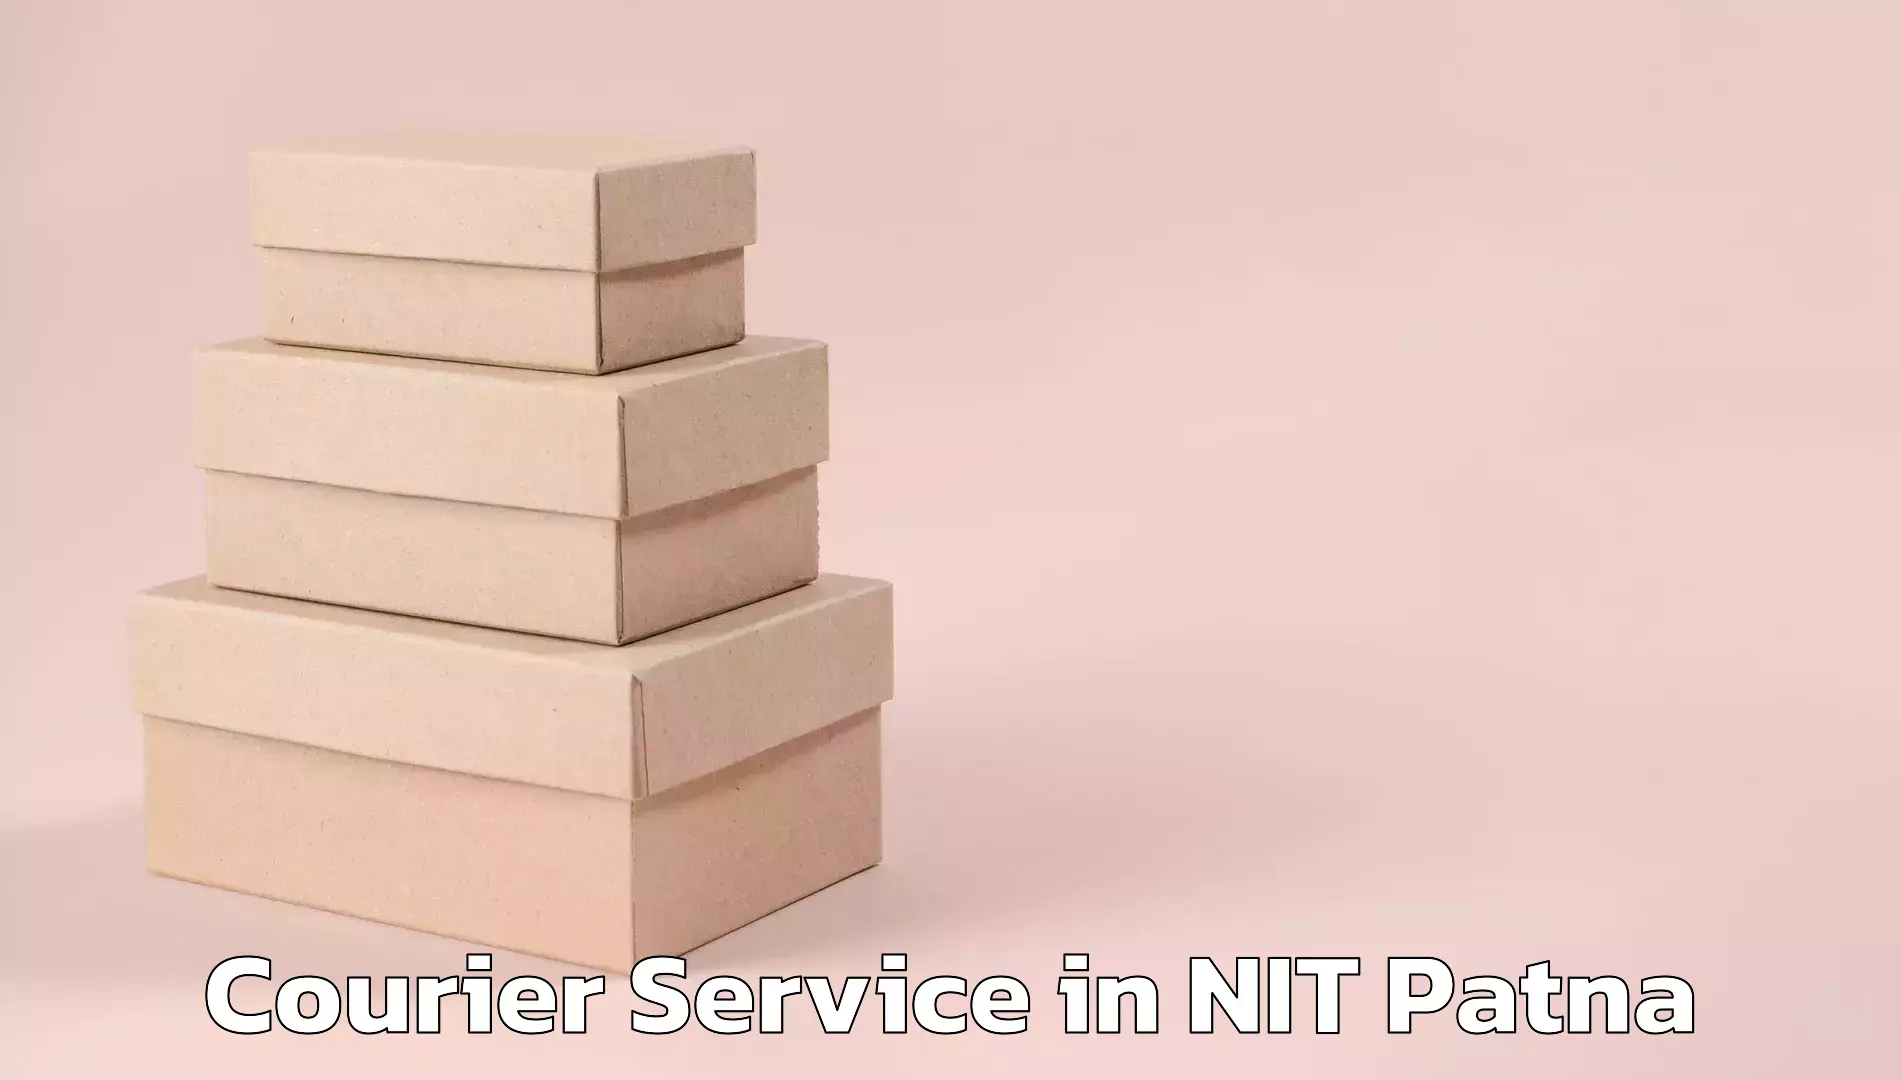 Quality courier services in NIT Patna